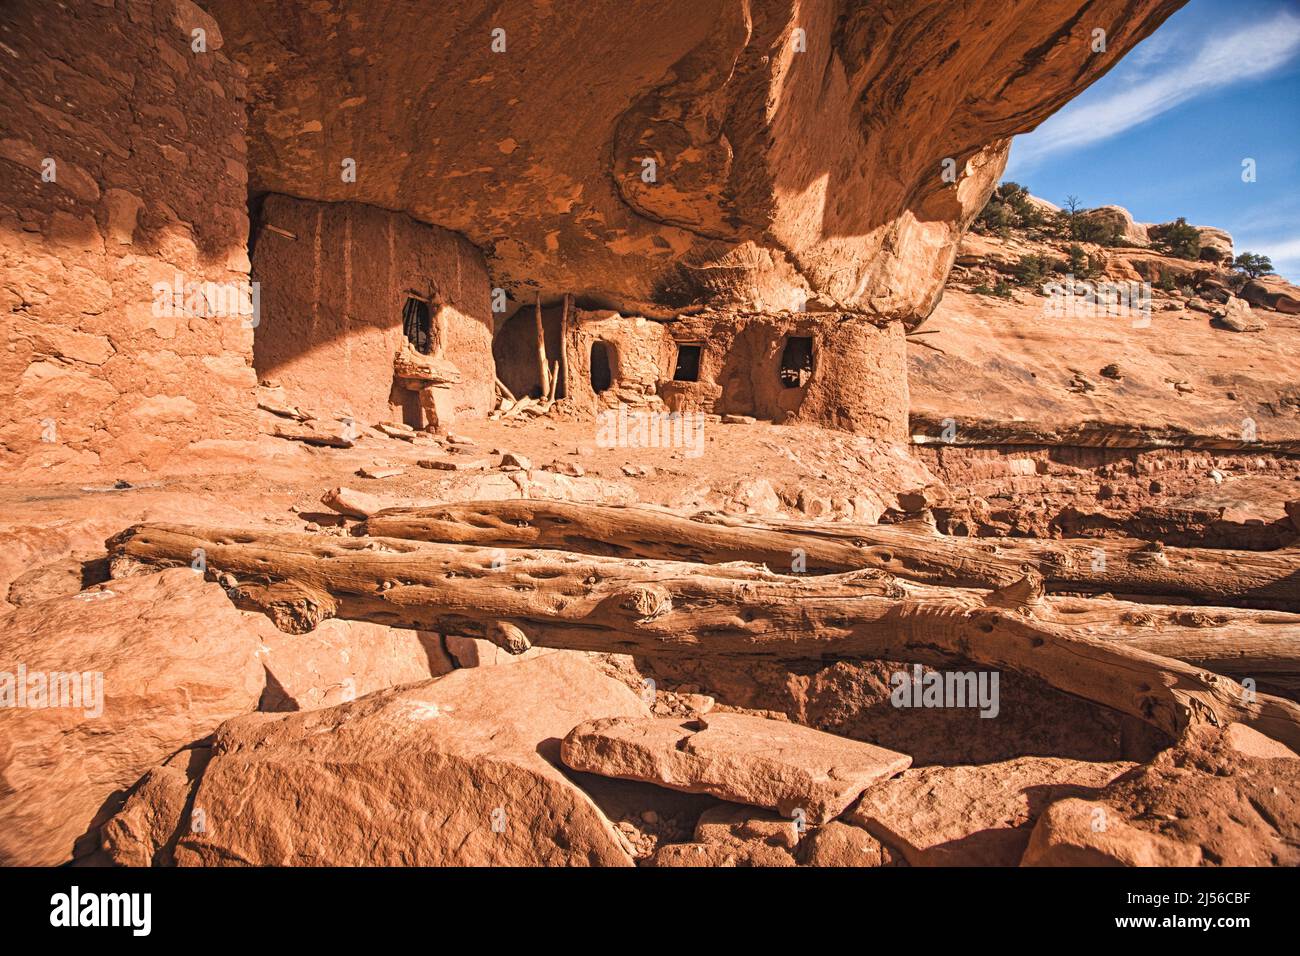 Roof timbers and cliff dwellings in the Moon House Ruin complex on Cedar Mesa, Bears Ears National Monument, Utah.  The Moon House Ruin complex is a g Stock Photo